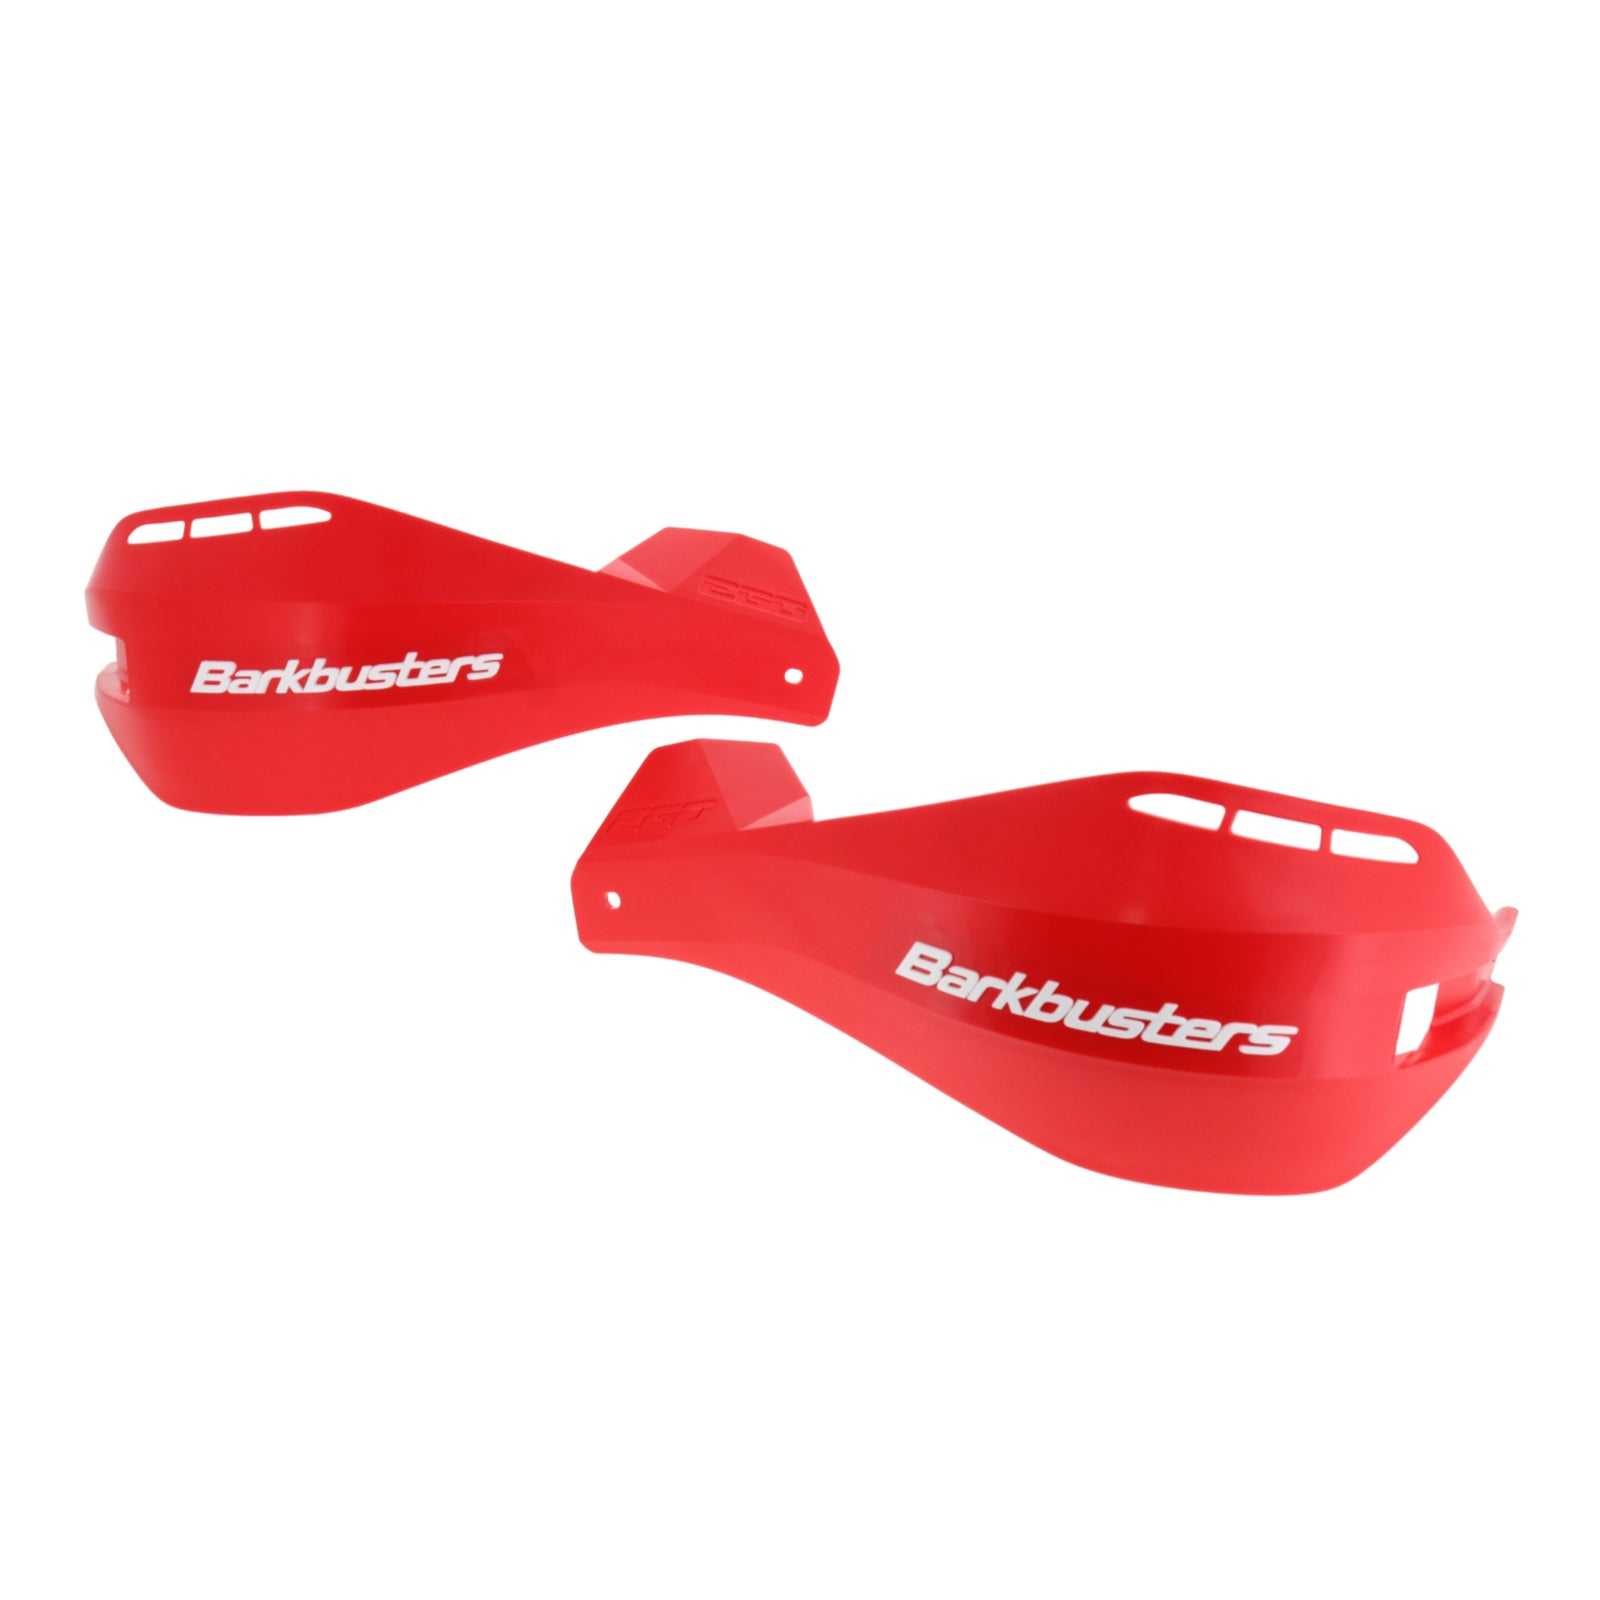 Barkbusters, Barkbusters Ego Replacement Plastics - Red